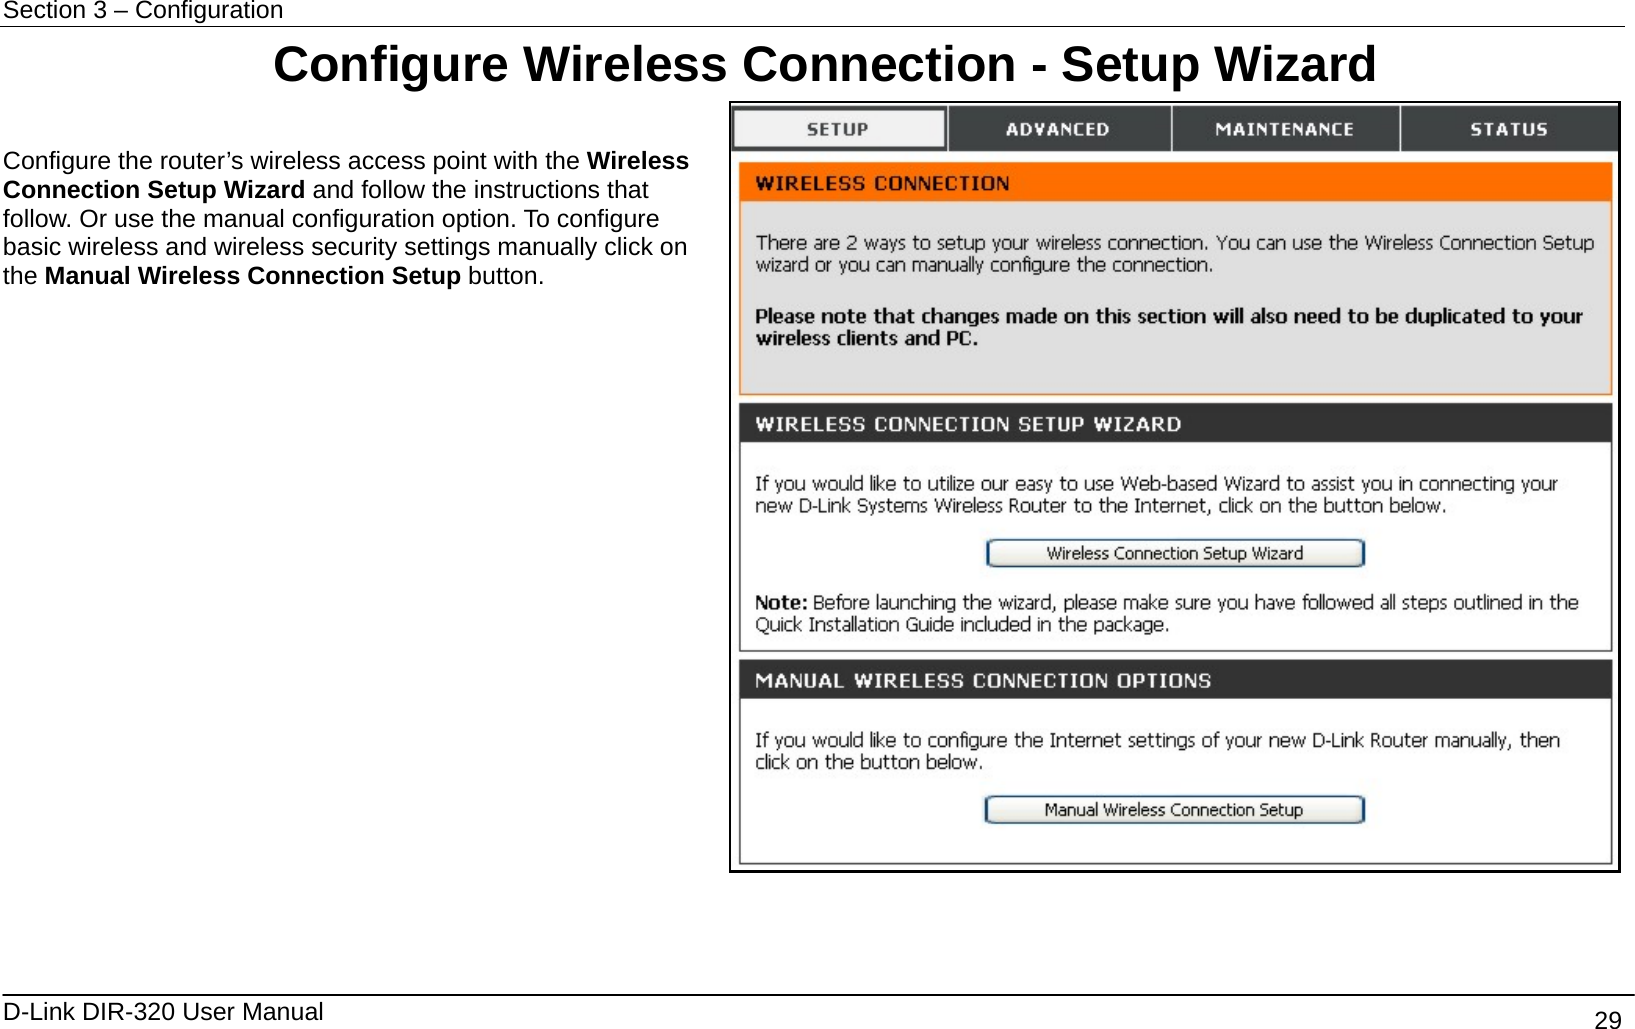 Section 3 – Configuration   D-Link DIR-320 User Manual                                       29   Configure Wireless Connection - Setup Wizard  Configure the router’s wireless access point with the Wireless Connection Setup Wizard and follow the instructions that follow. Or use the manual configuration option. To configure basic wireless and wireless security settings manually click on the Manual Wireless Connection Setup button.   